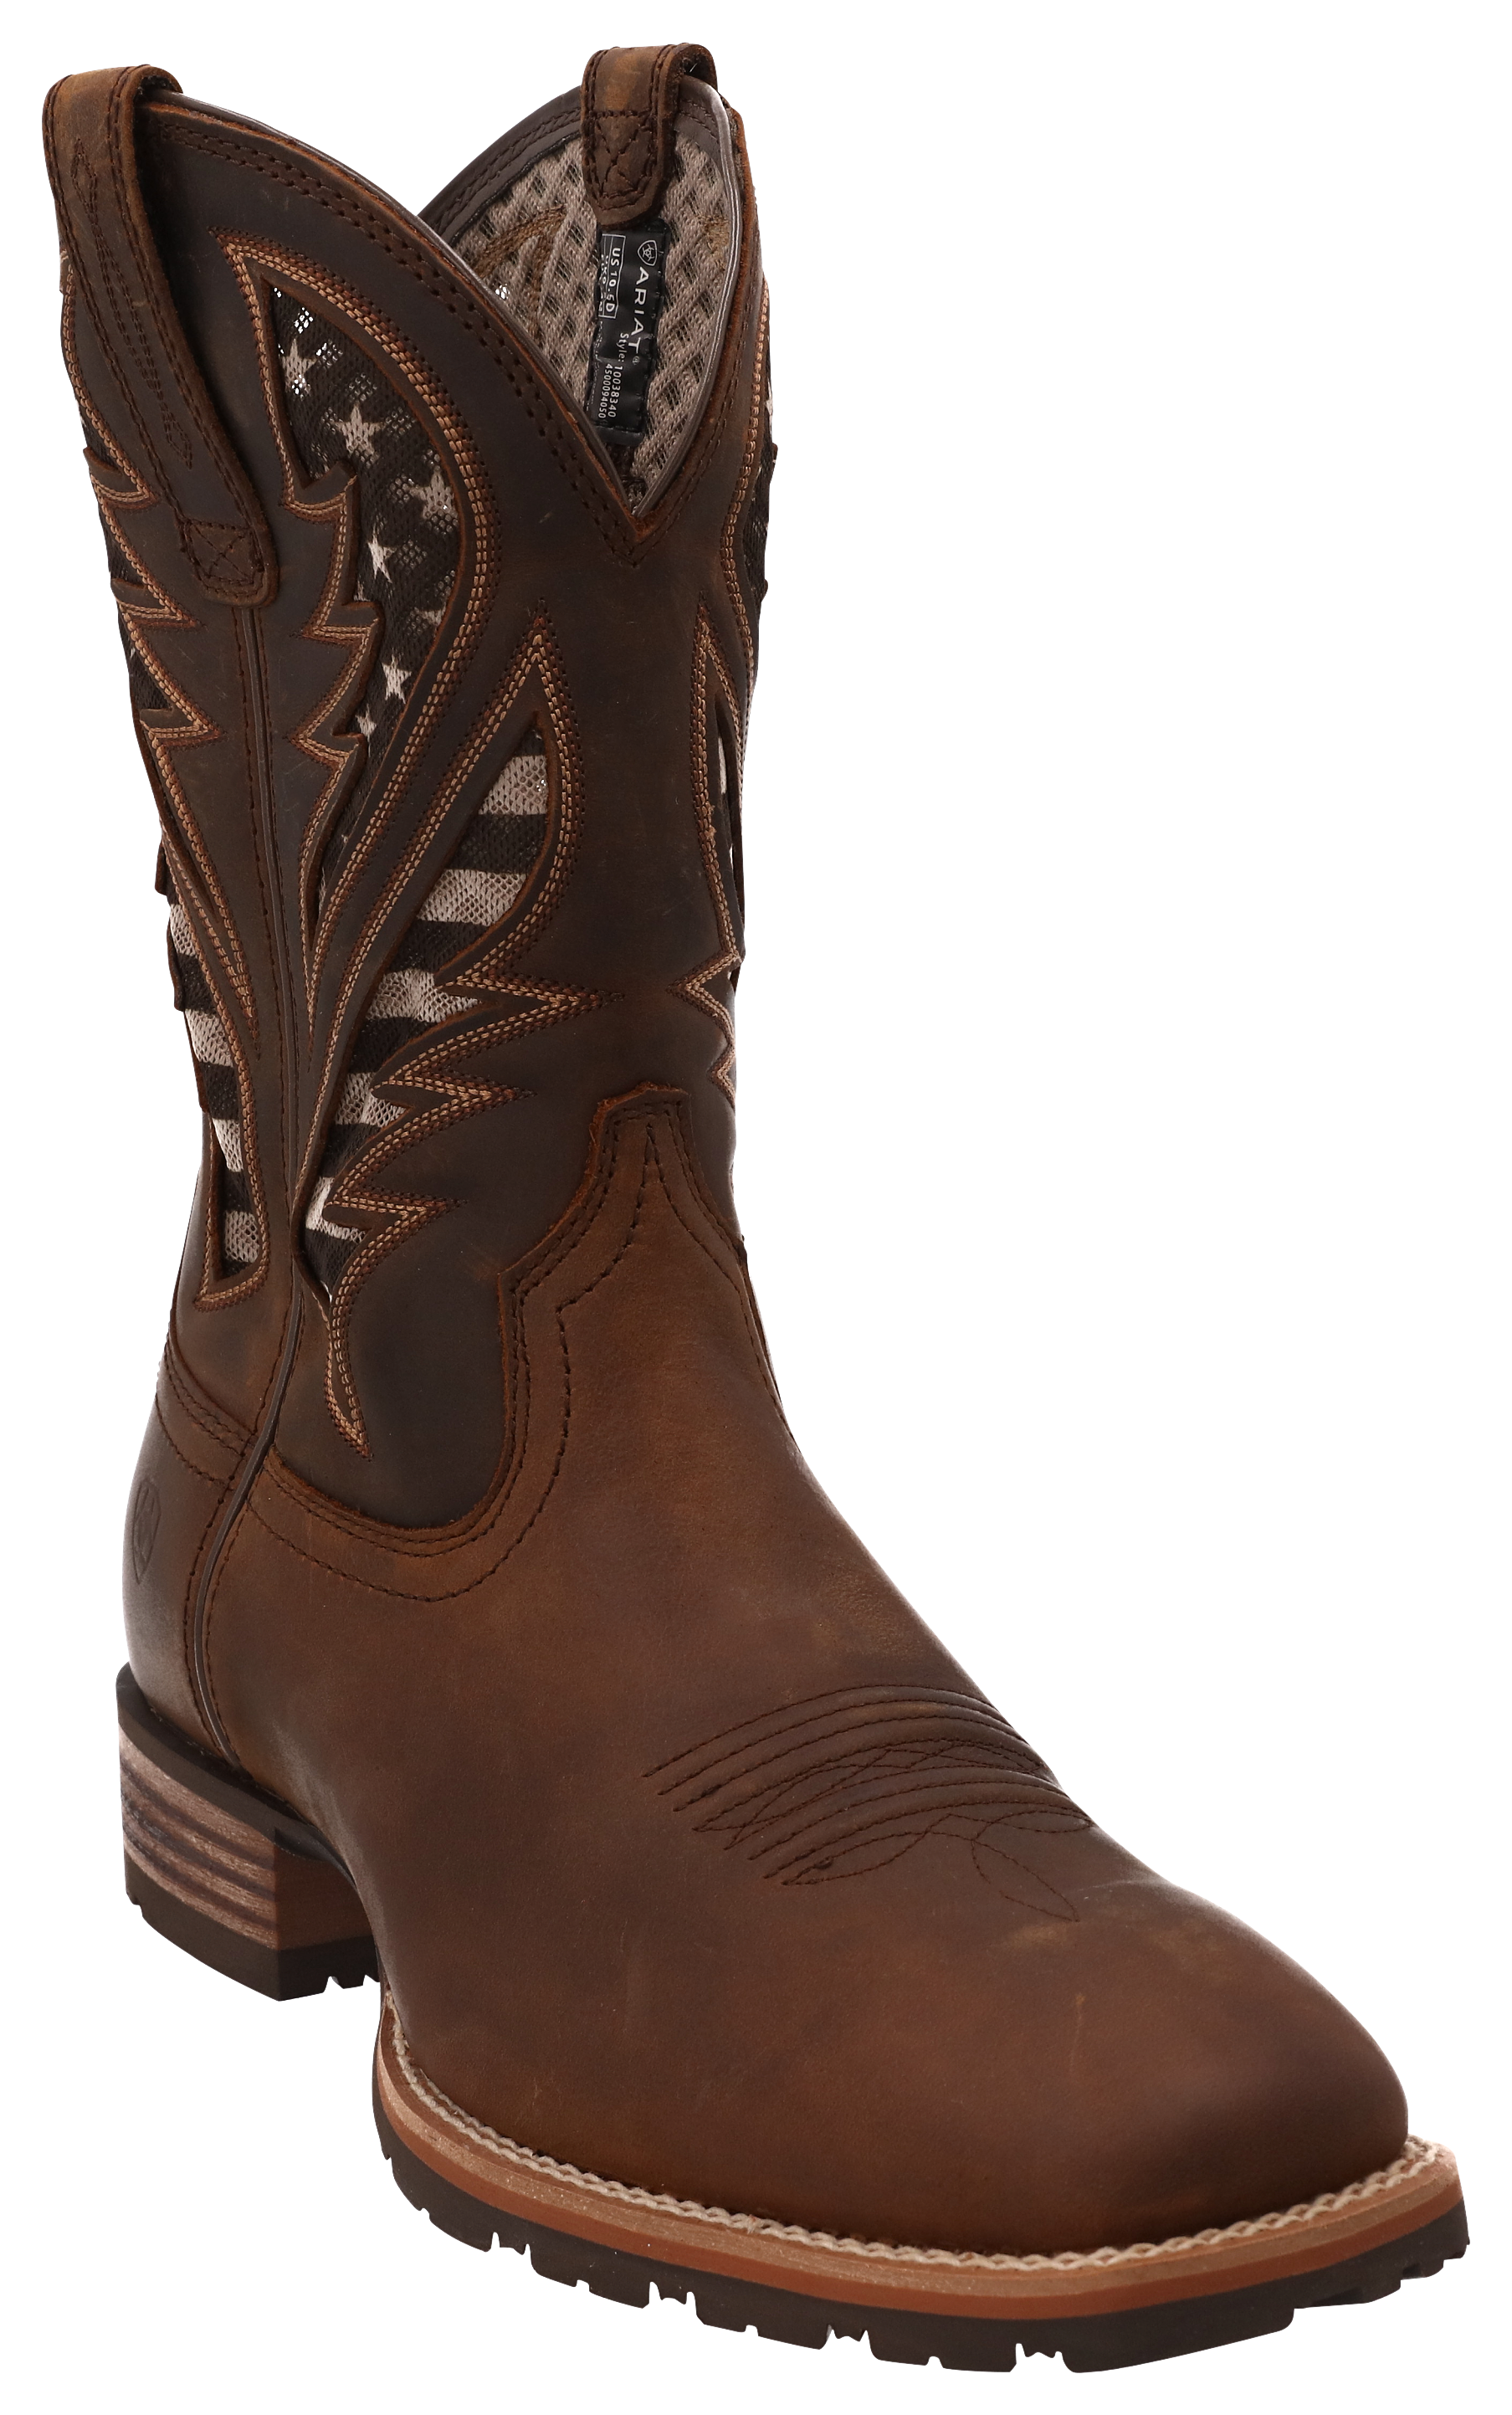 Men's Ariat Hybrid Rancher, Adult, Size: 11, Distressed Brown Leather